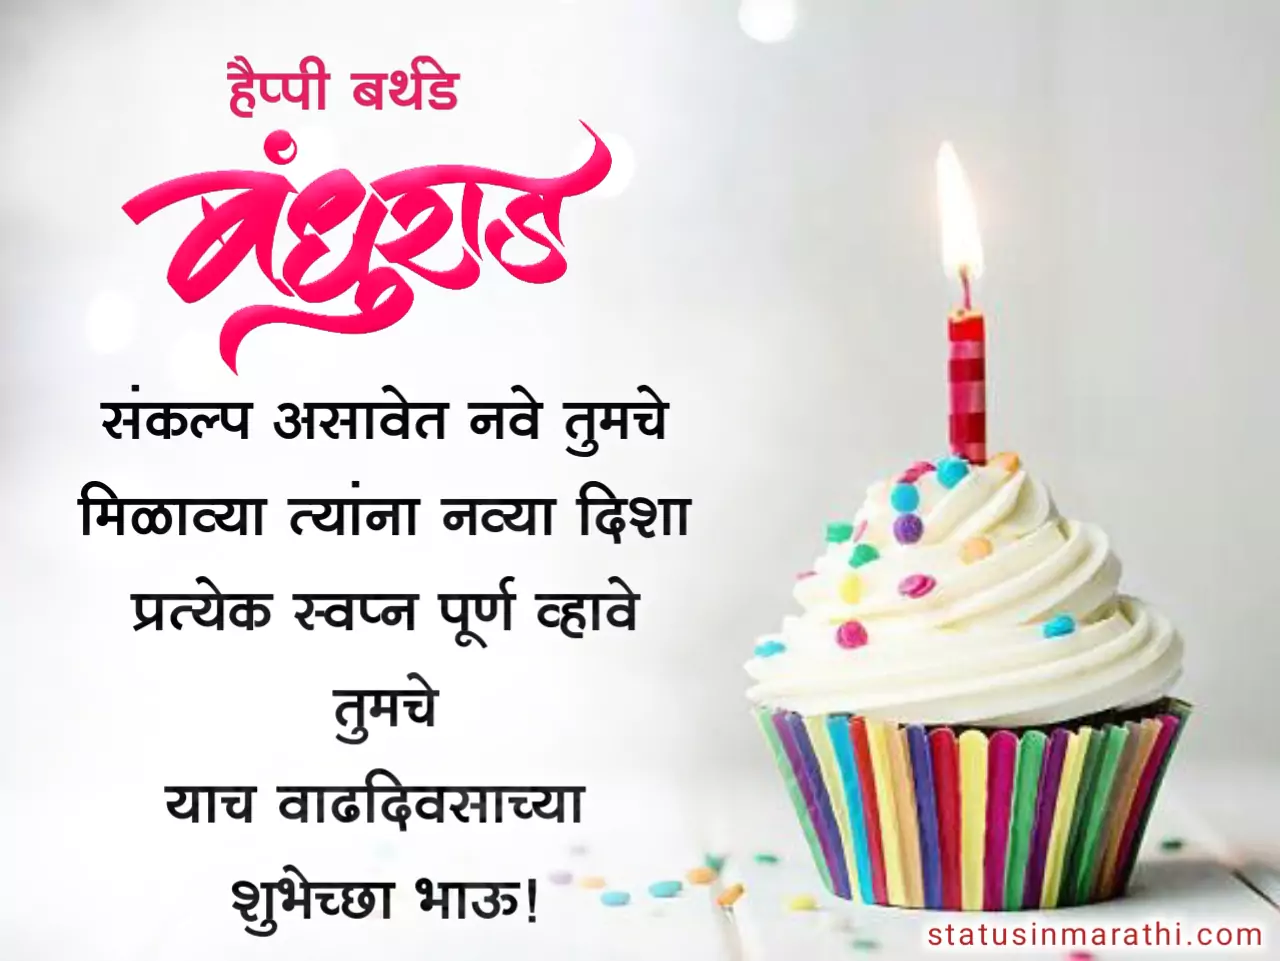 Happy Birthday quotes for brother in marathi